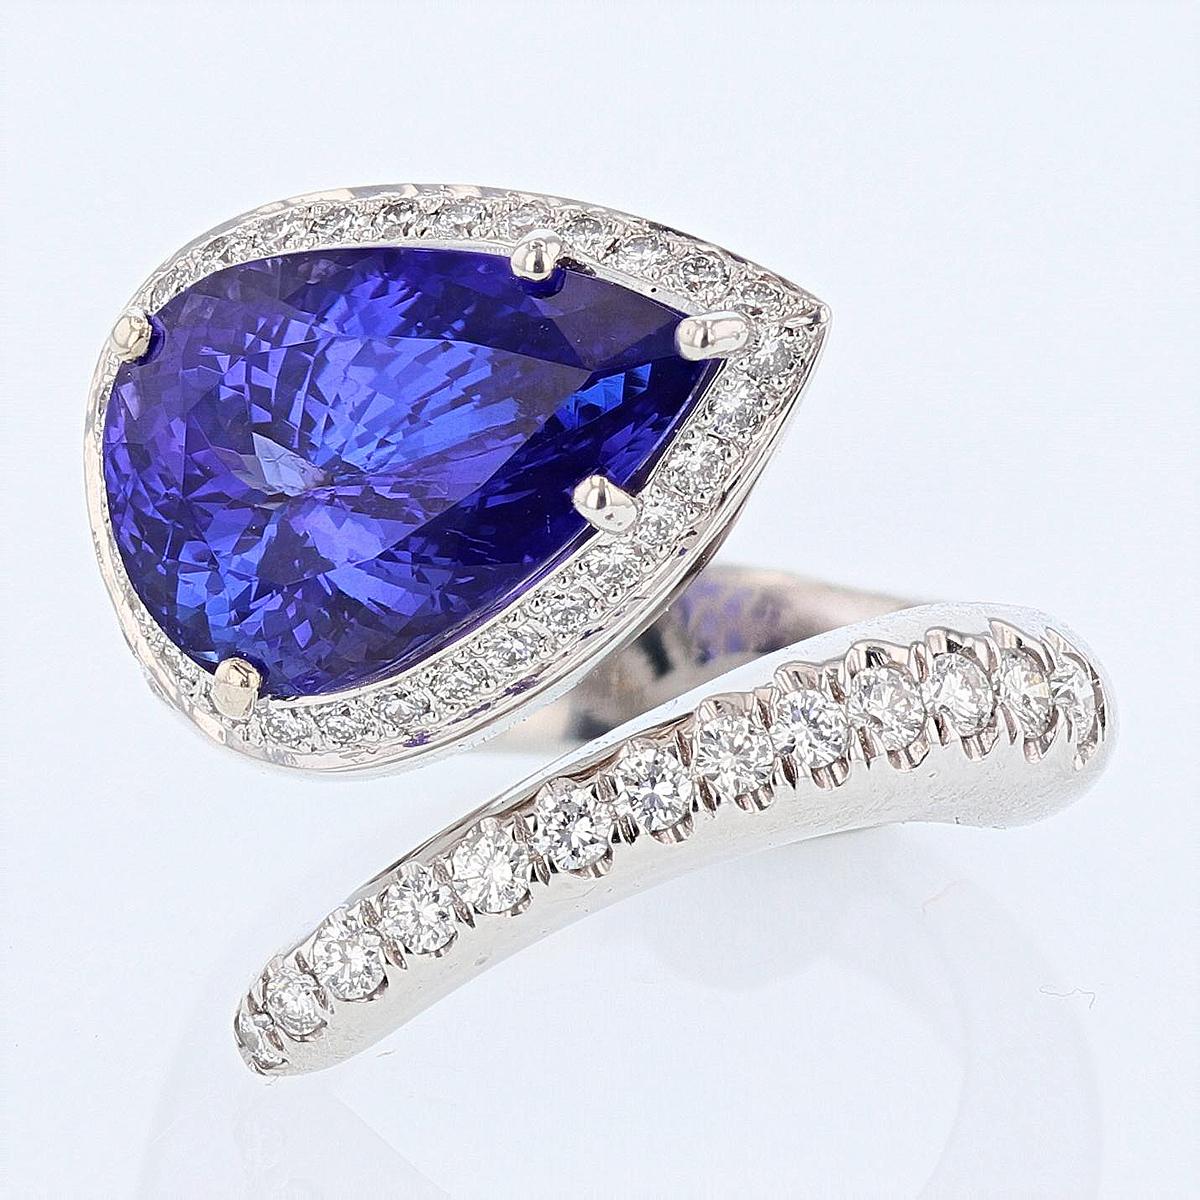 This ring is designed by Nazarelle and made in 14 karat white gold. The center stone is a pear shape tanzanite weighing 7.10 carats and is prong set. The mounting features 59 round cut diamonds weighing 0.88 carats.